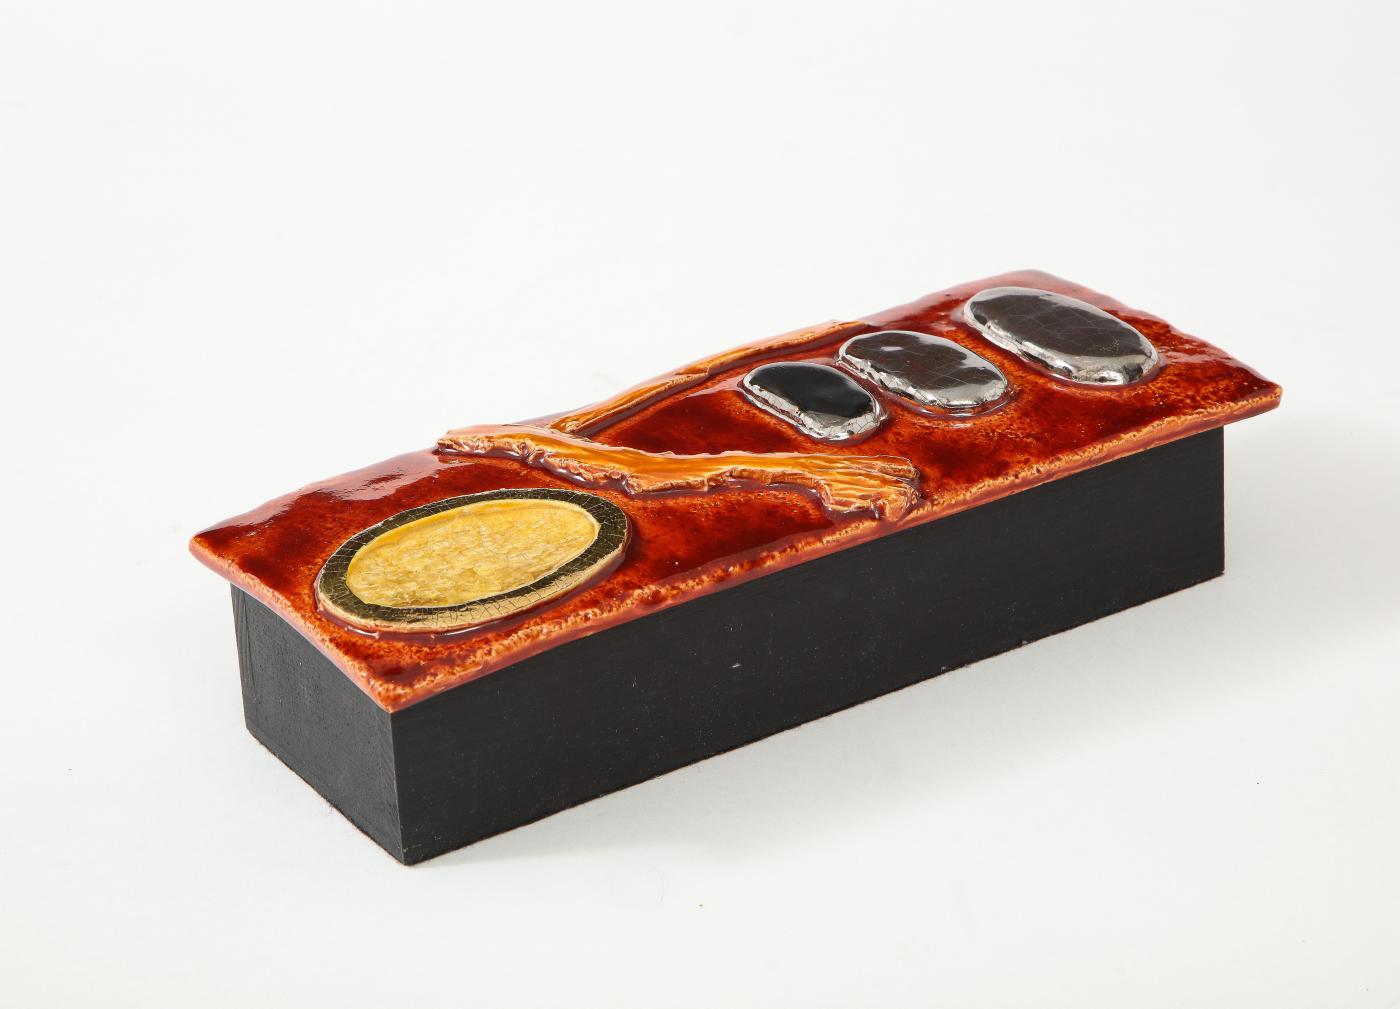 Enameled Ceramic Box by Marion De Crecy, France, c. 1975

Enameled Ceramic Lid and Black Wooden Under Box.

